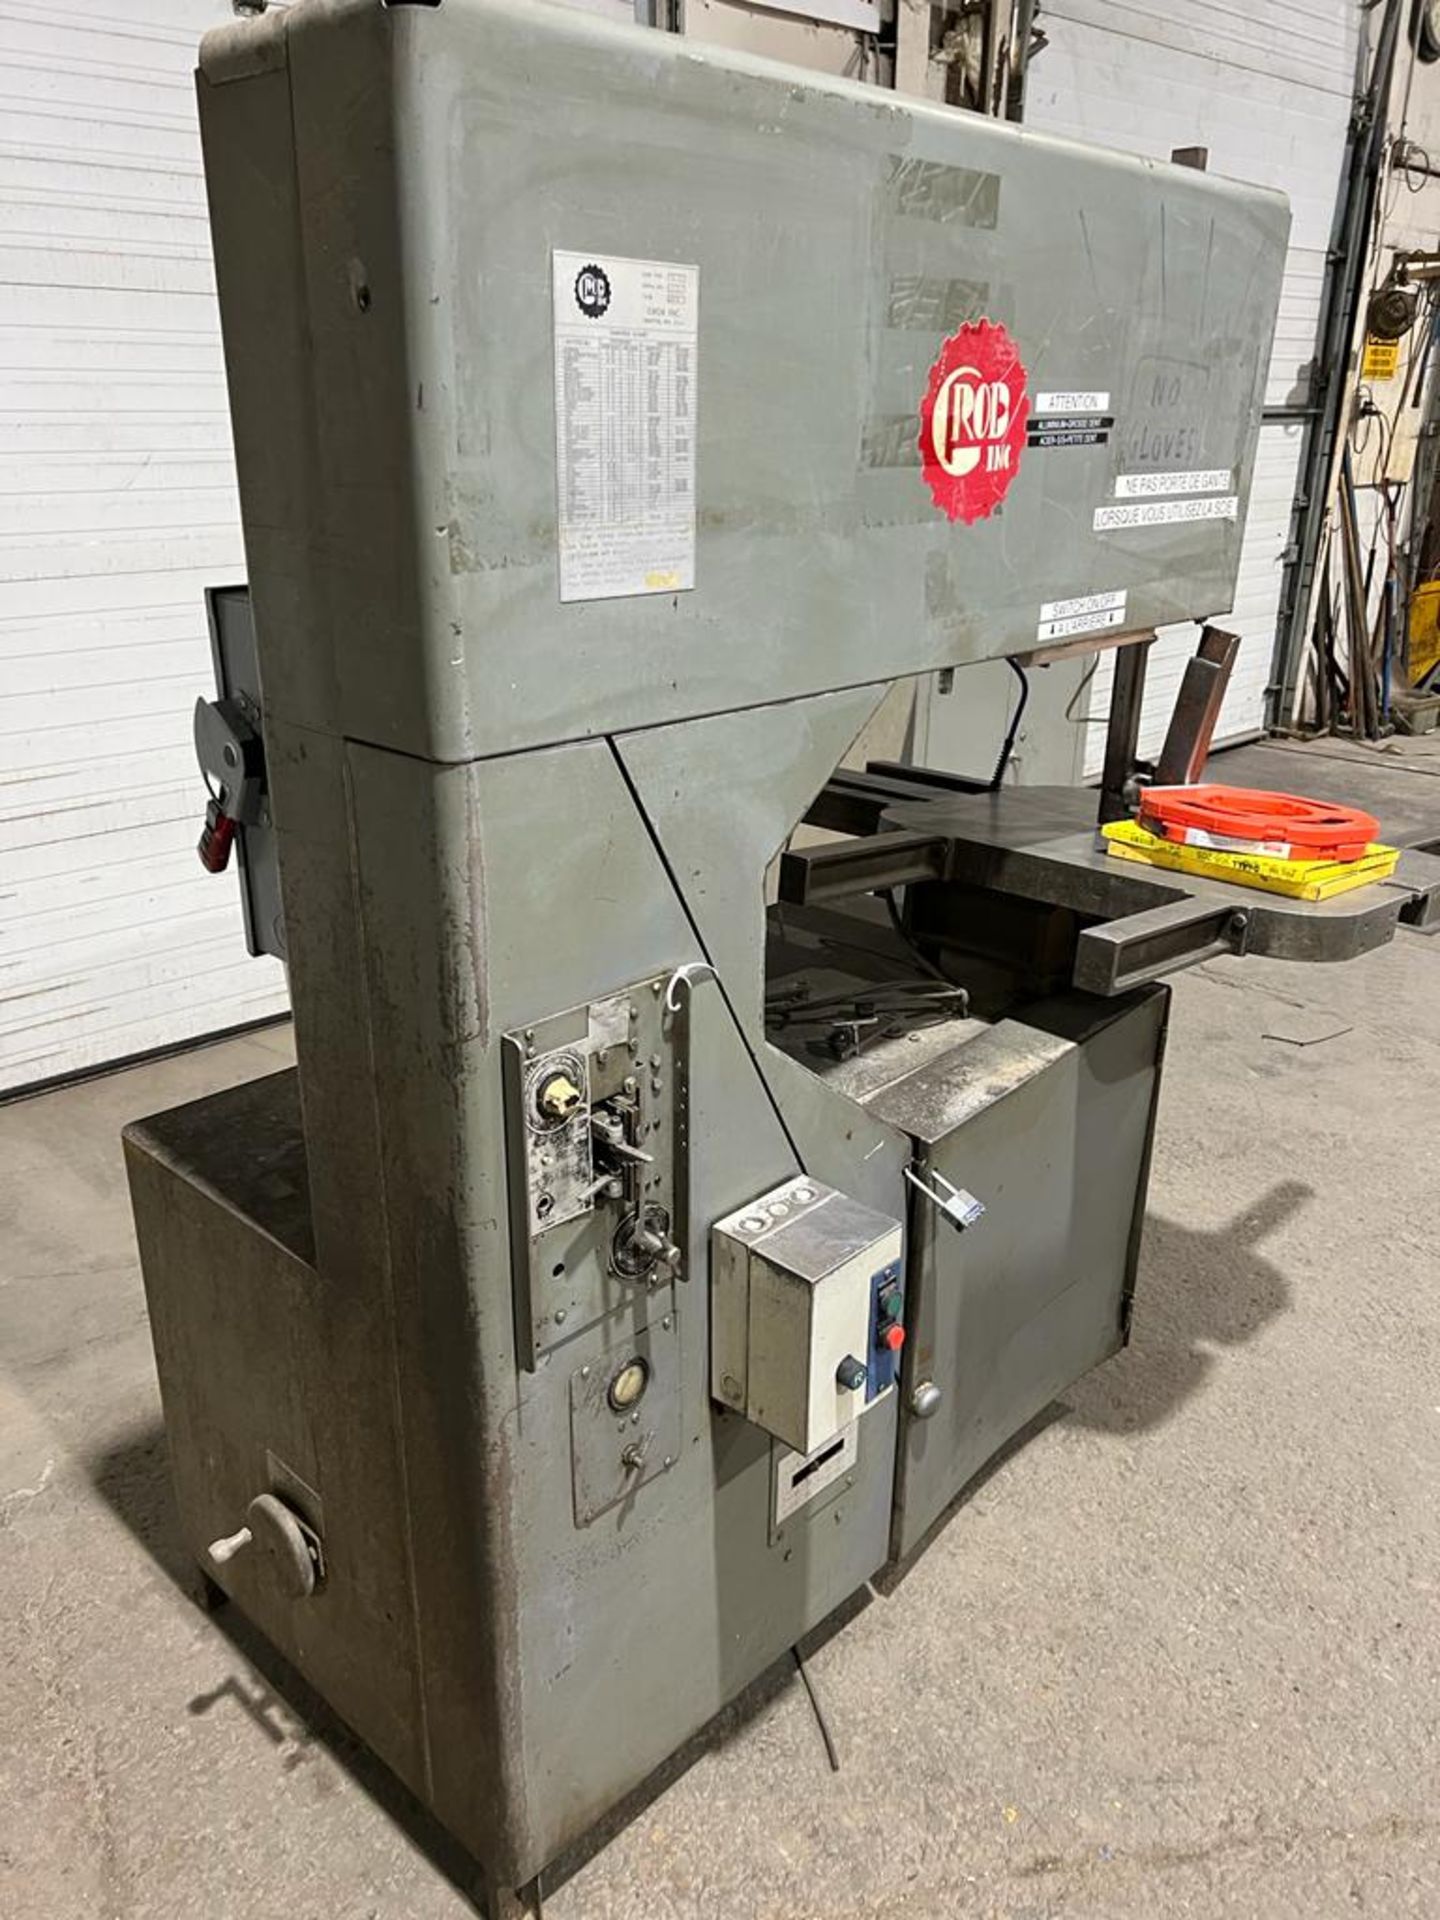 Grob 36" Cutting Capacity Vertical Band Saw with Tilting Table, Blade Welder and Extra blades - Image 2 of 3